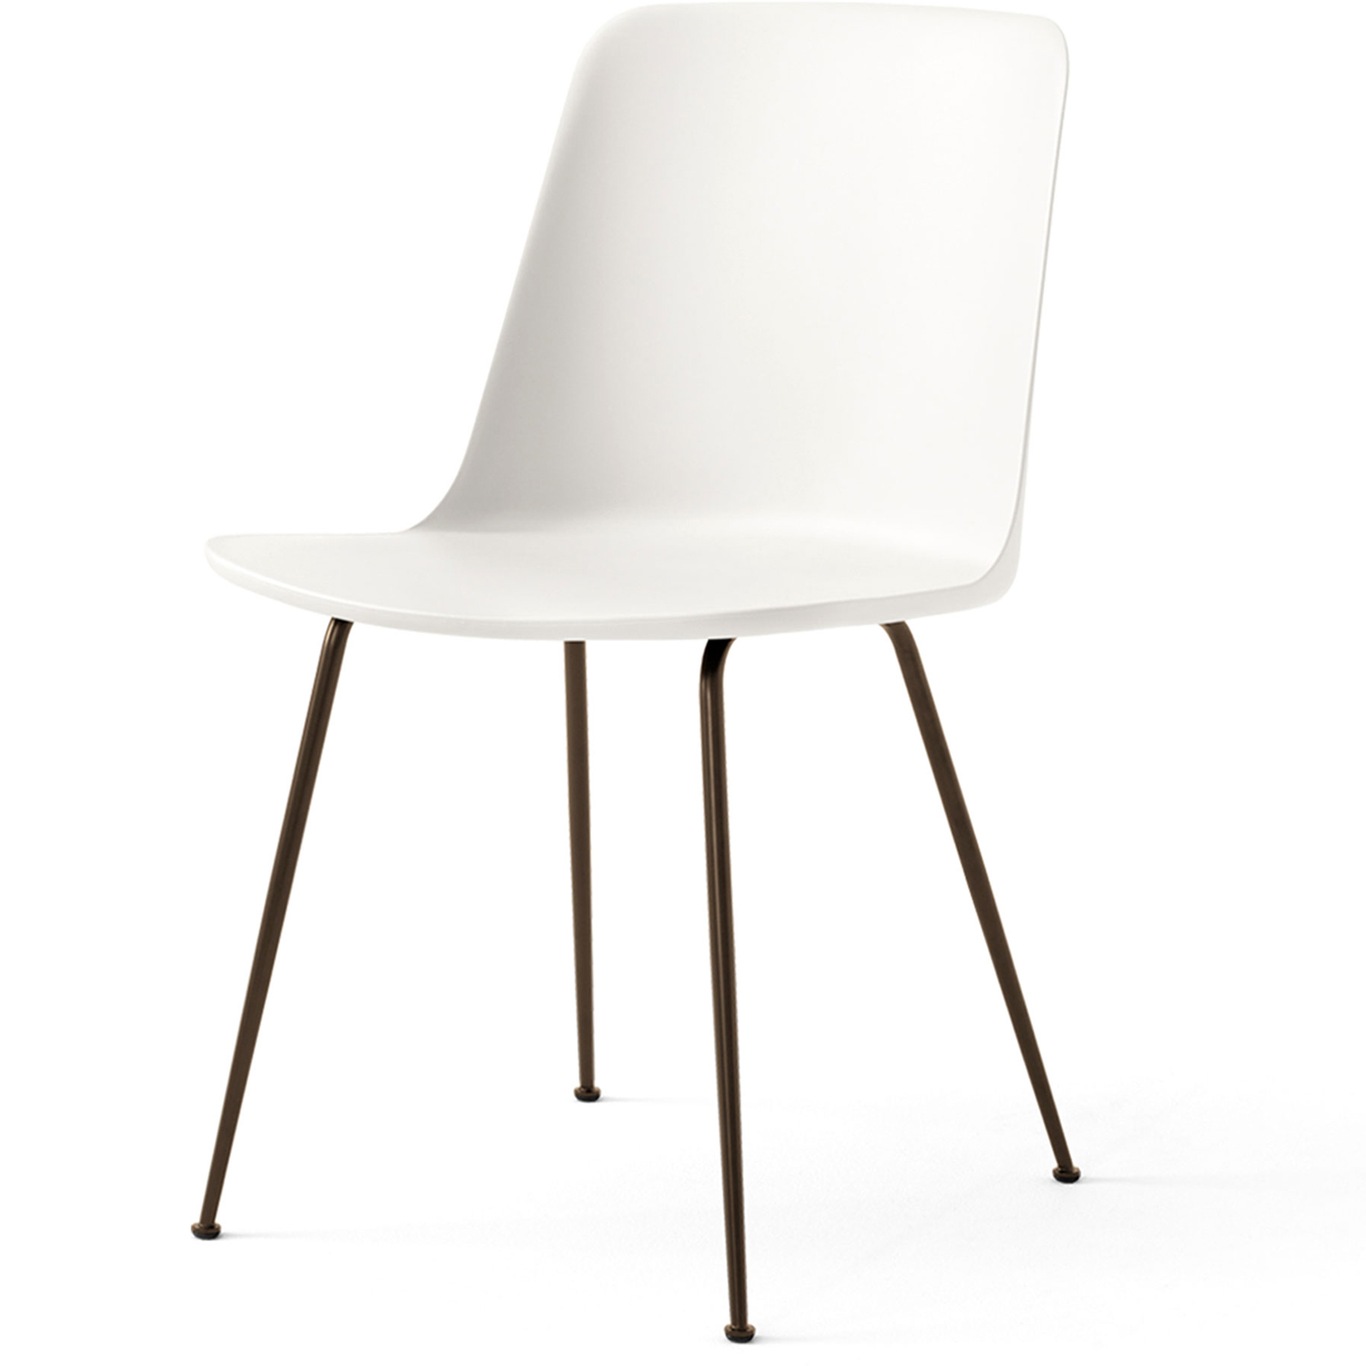 Rely Chair HW6, Bronzed / White